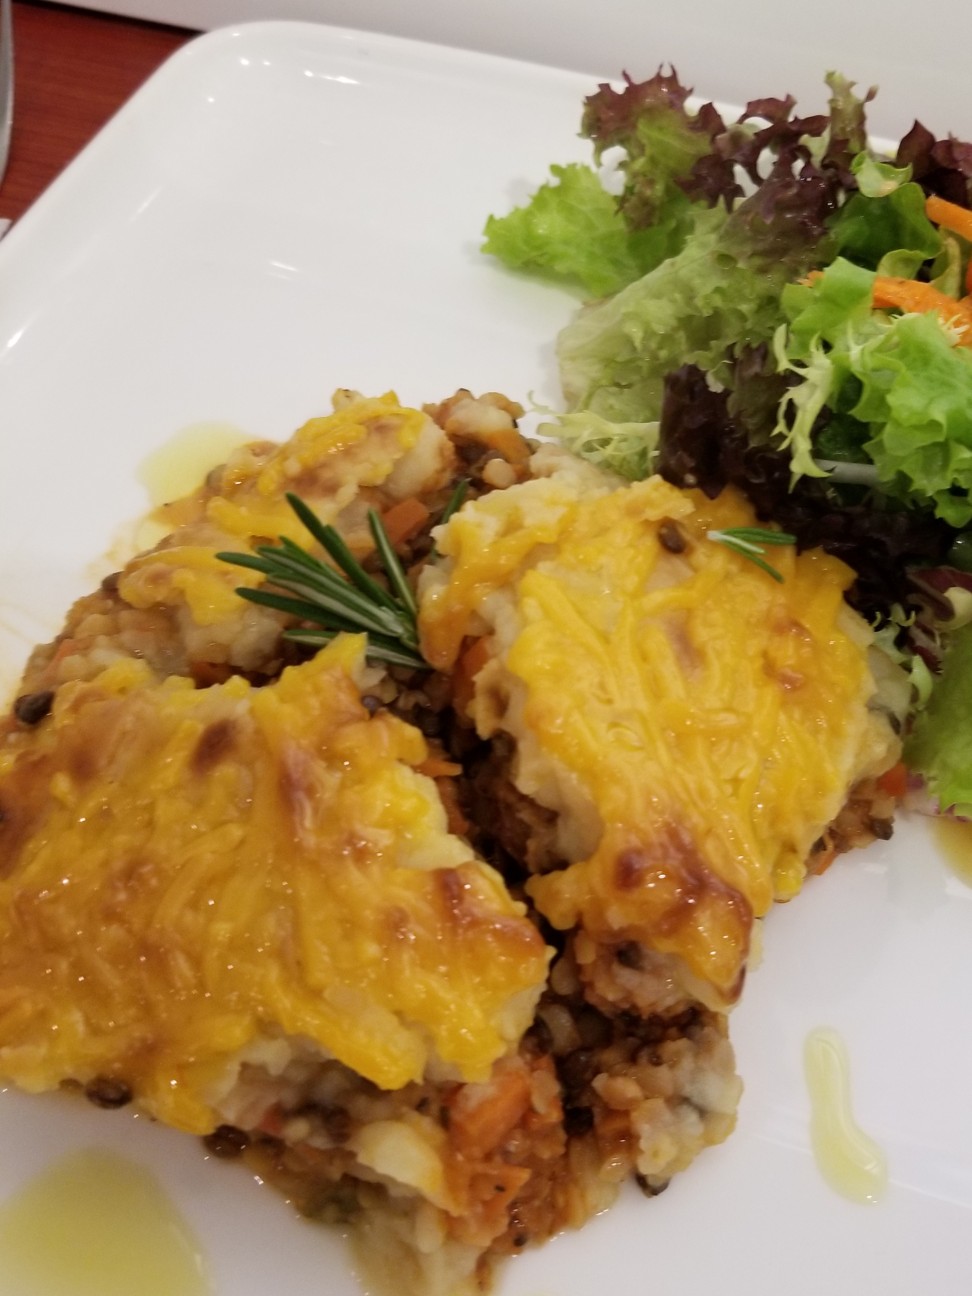 Shepherd-less Pie at Confusion Plant-based Kitchen in Sheung Wan. Photo: SCMP